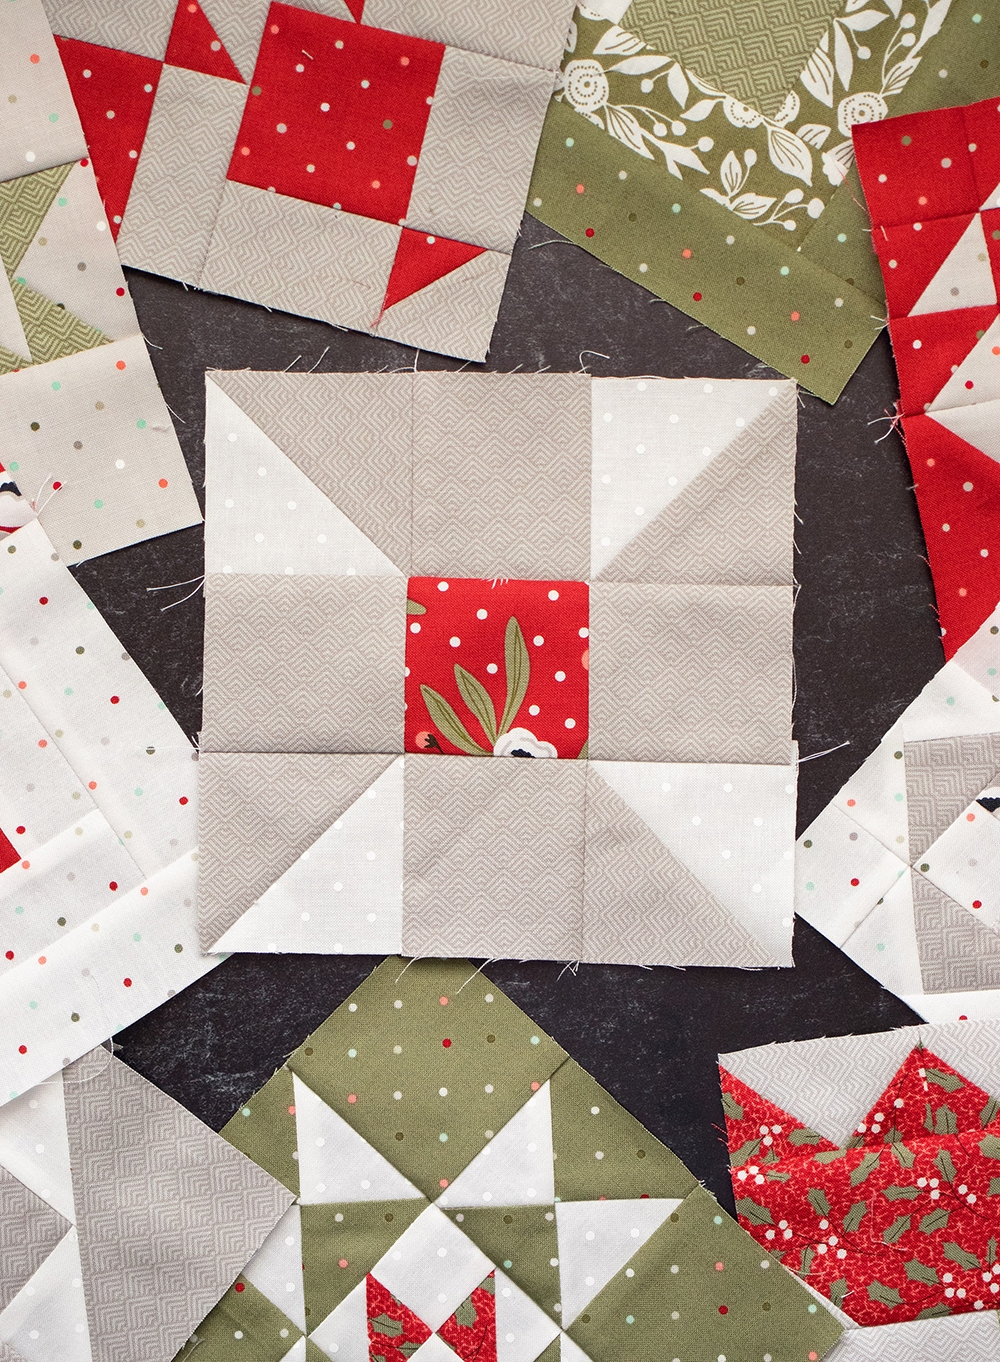 Sewcialites Quilt Along: Free Block of the Week. Block 17 is "Peace" by Anne Sutton of Bunny Hill Designs. Fabric is Christmas Morning by Lella Boutique.